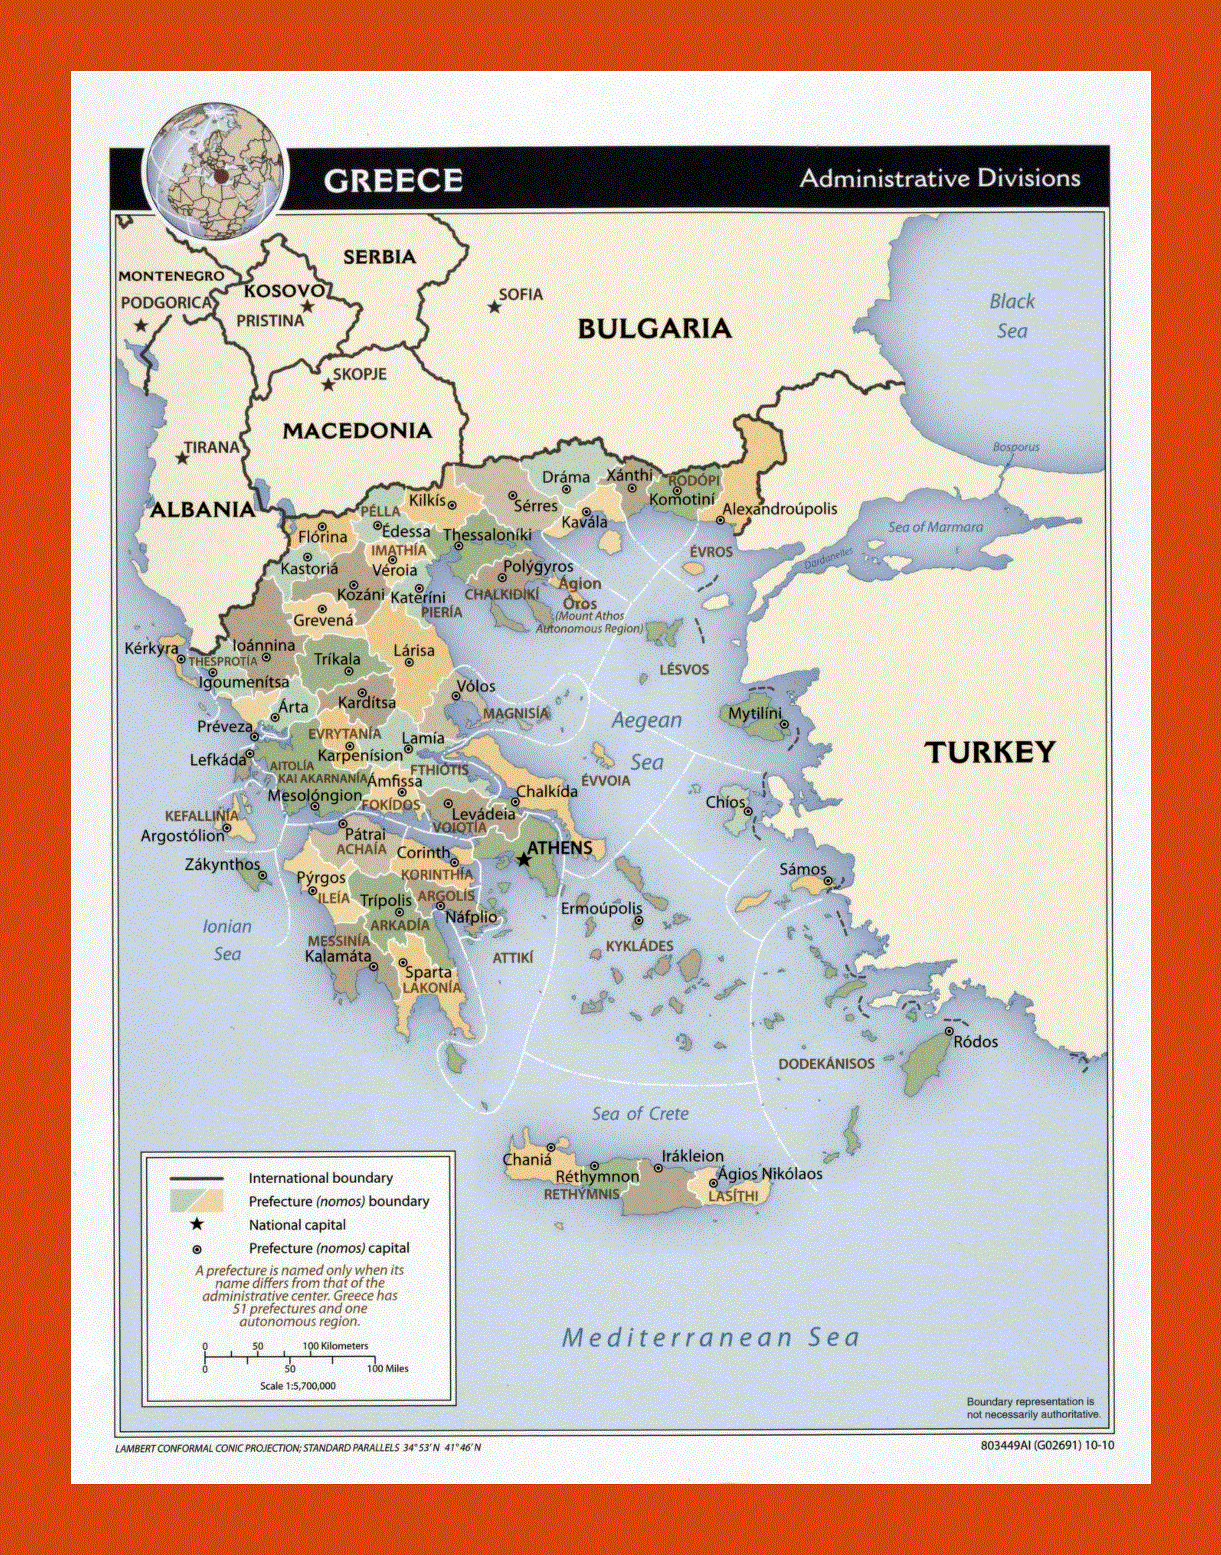 Administrative divisions map of Greece - 2010